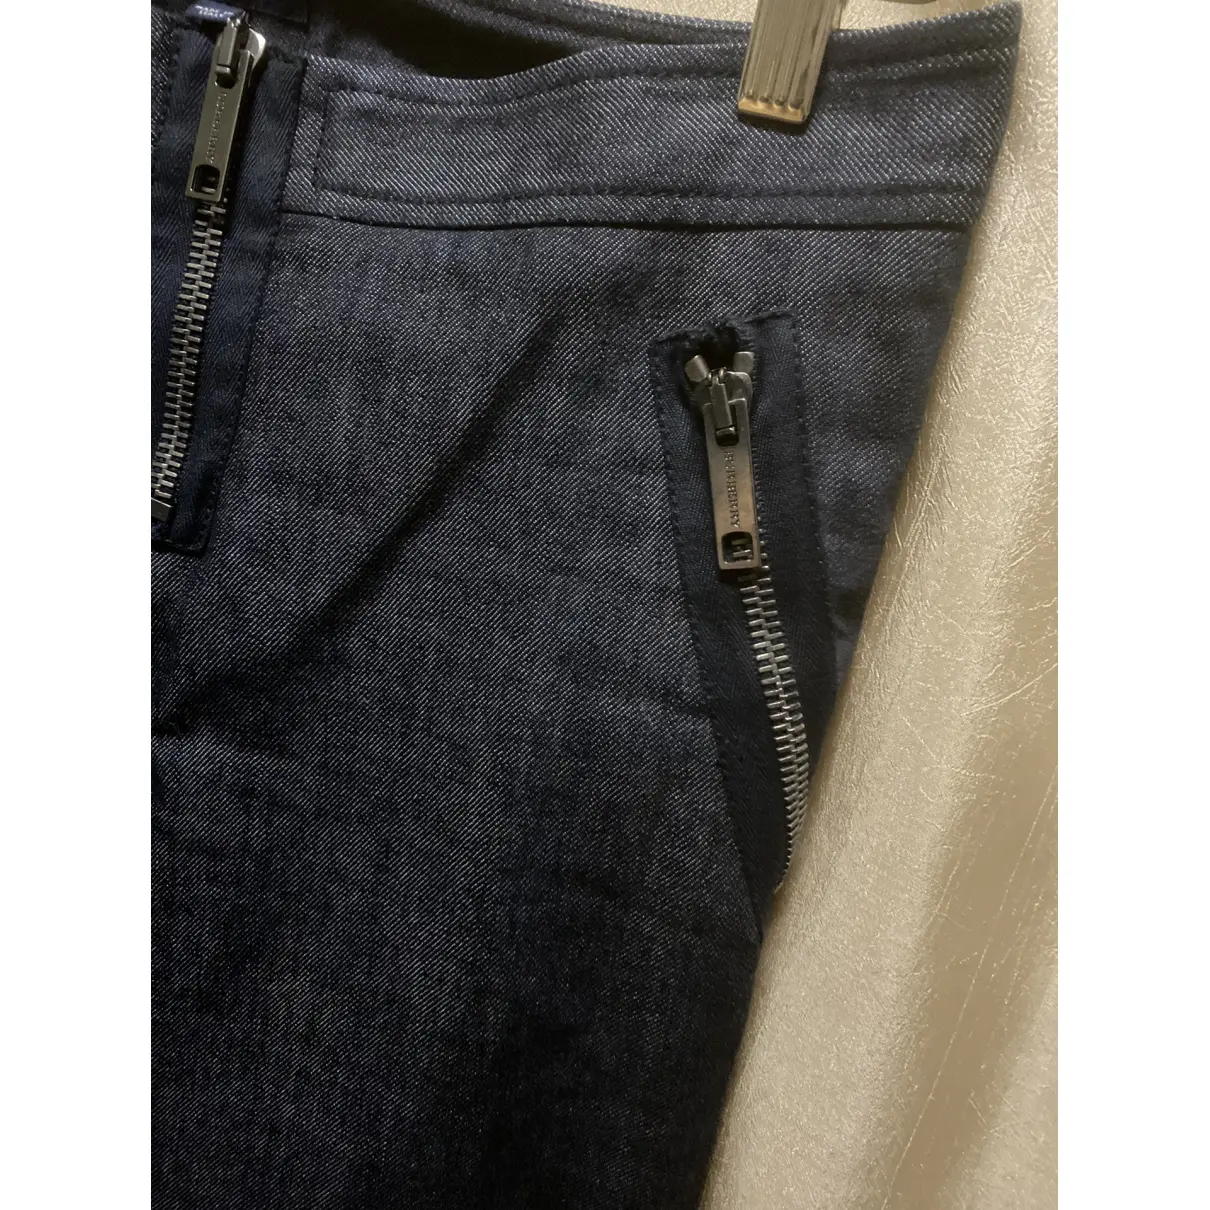 Bootcut jeans Burberry